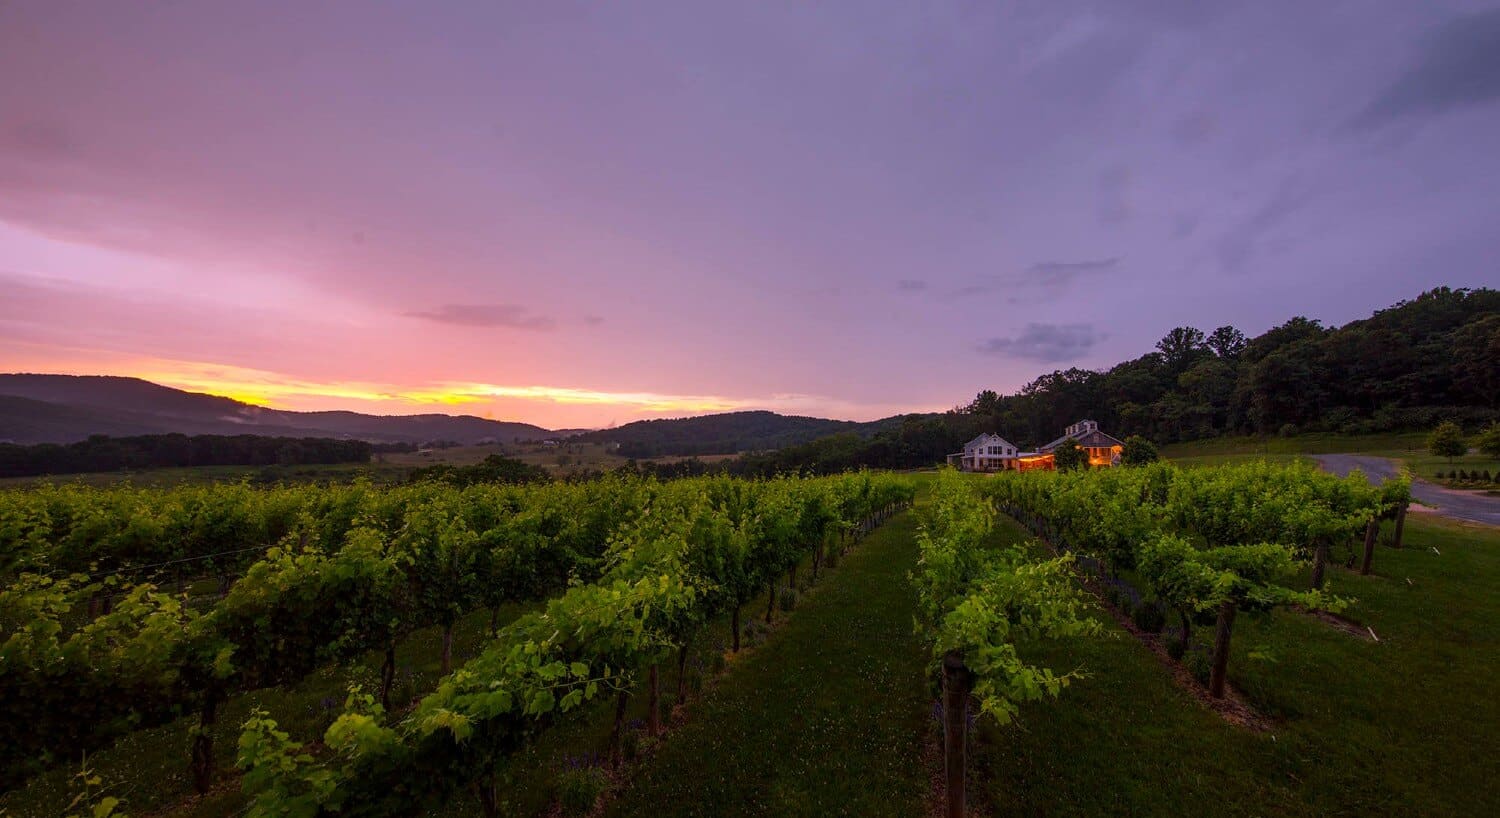 An expansive vineyard with lush green plants on the vines and a home lit up at night in the distance